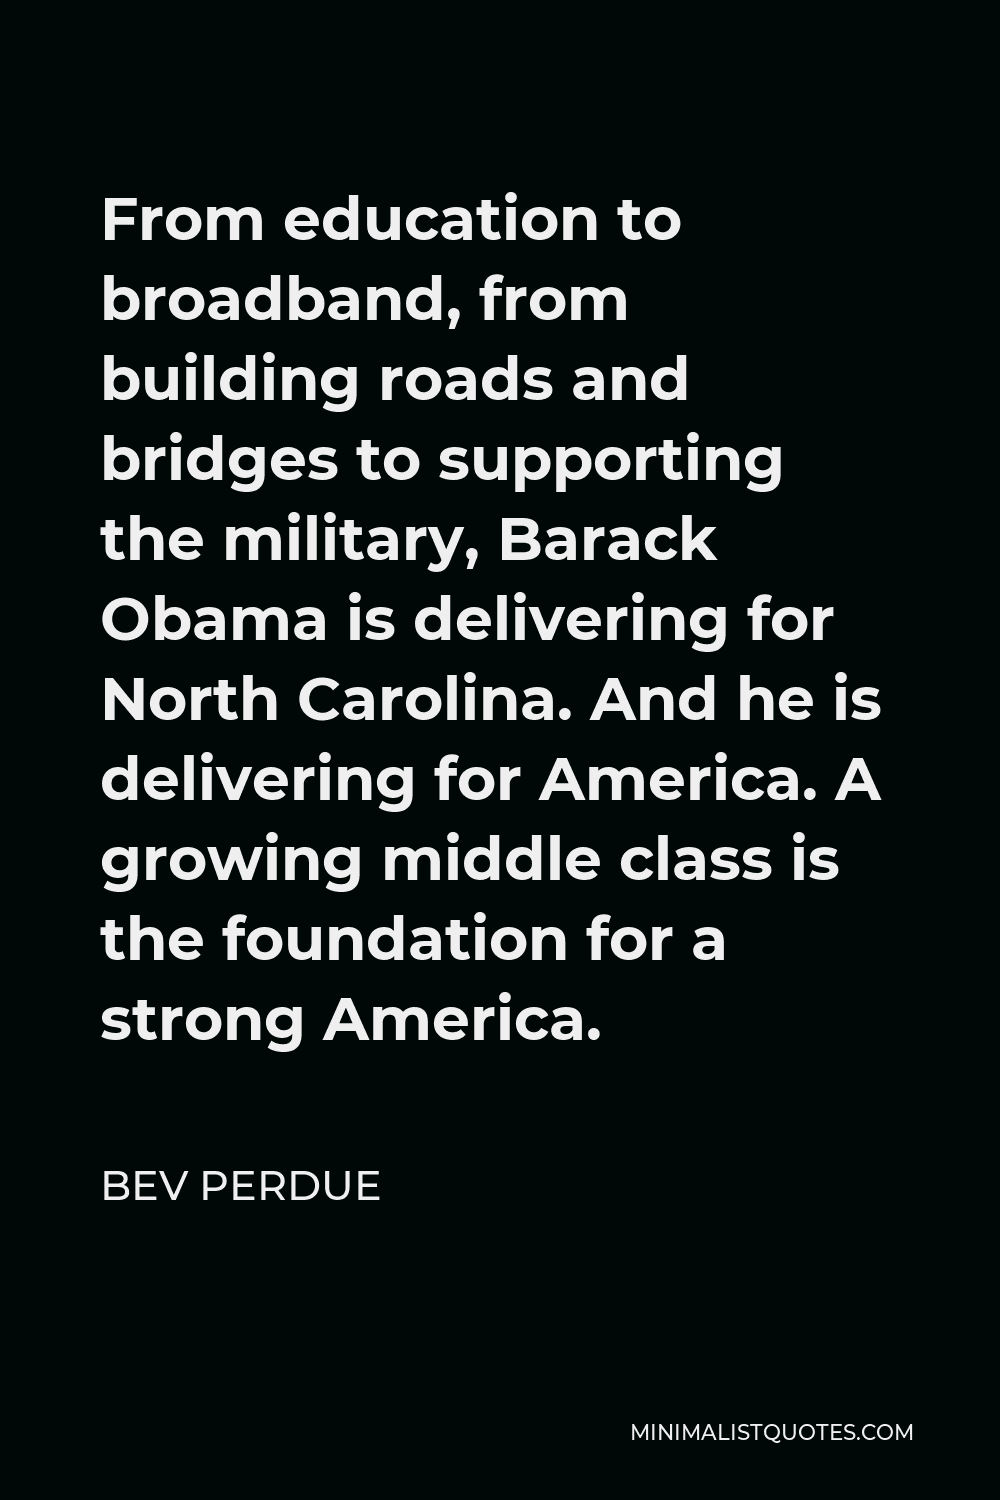 Bev Perdue Quote - From education to broadband, from building roads and bridges to supporting the military, Barack Obama is delivering for North Carolina. And he is delivering for America. A growing middle class is the foundation for a strong America.